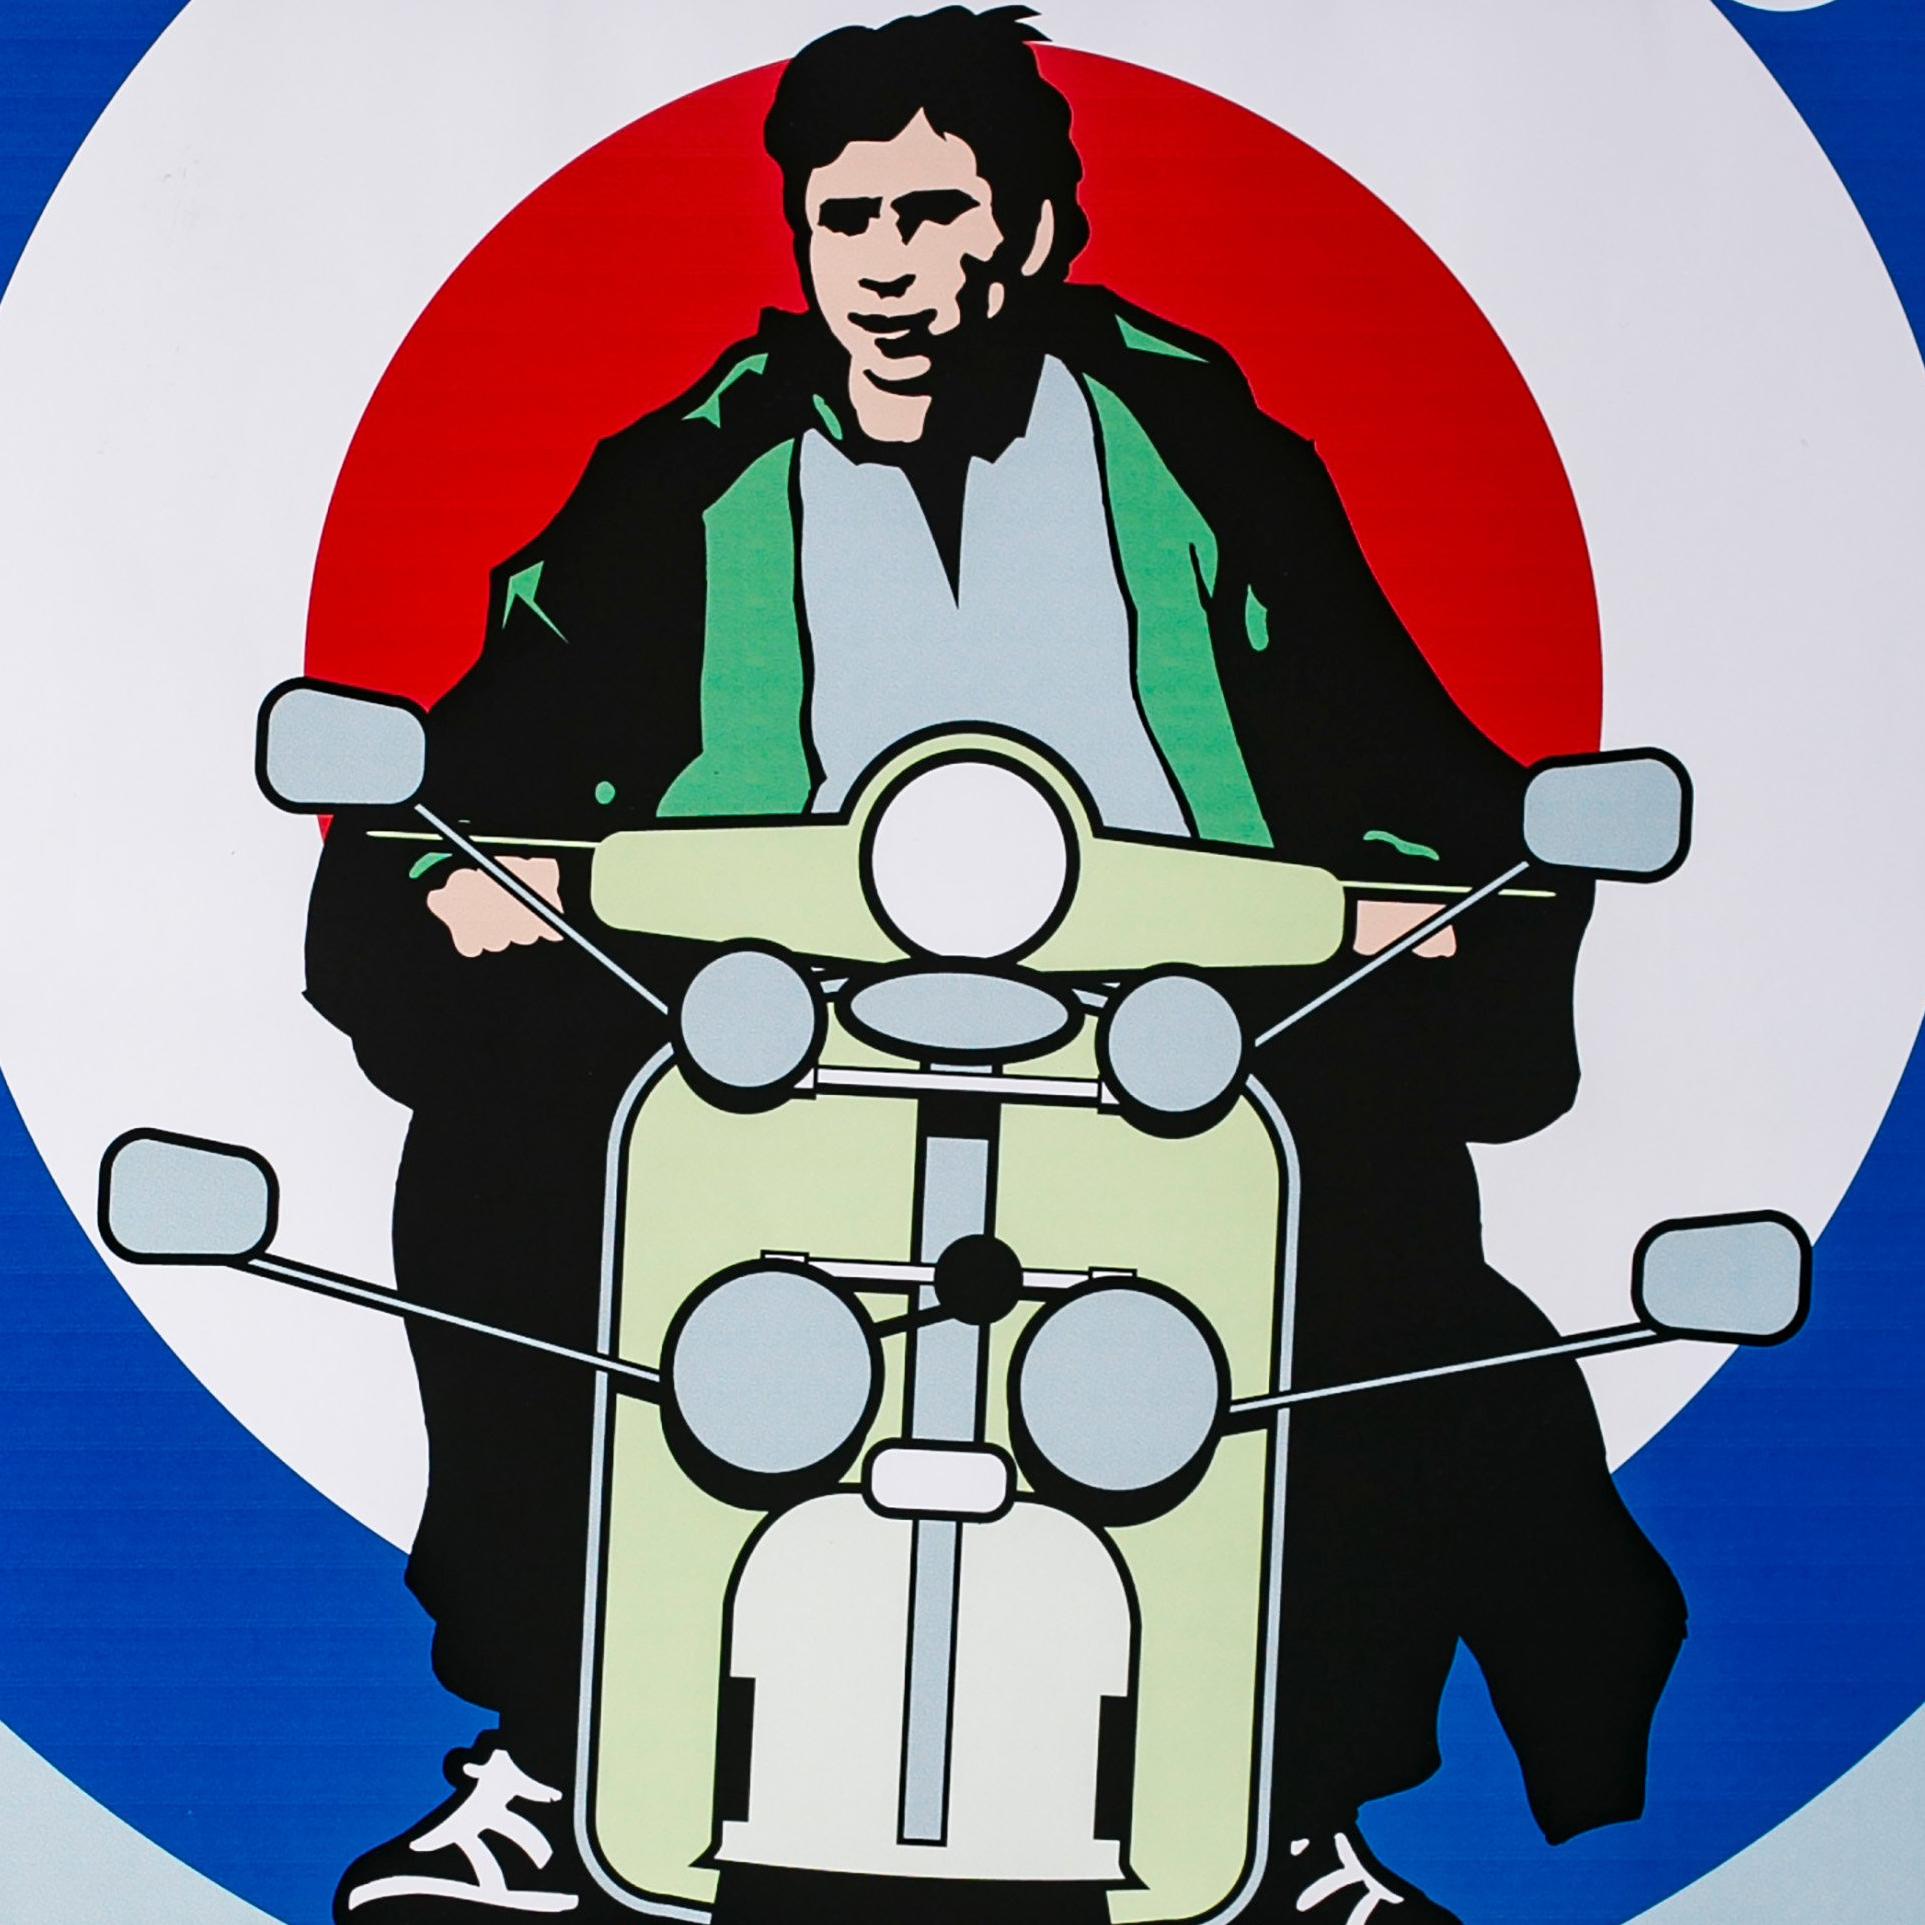 The WHO Concert at the American Airlines Center, Dallas Texas. The Who Tour 2006–2007 was The Who's first worldwide concert tour since 1997, supporting their Endless Wire album. The poster is signed by Uncle Charlie.

The artwork will be shipped